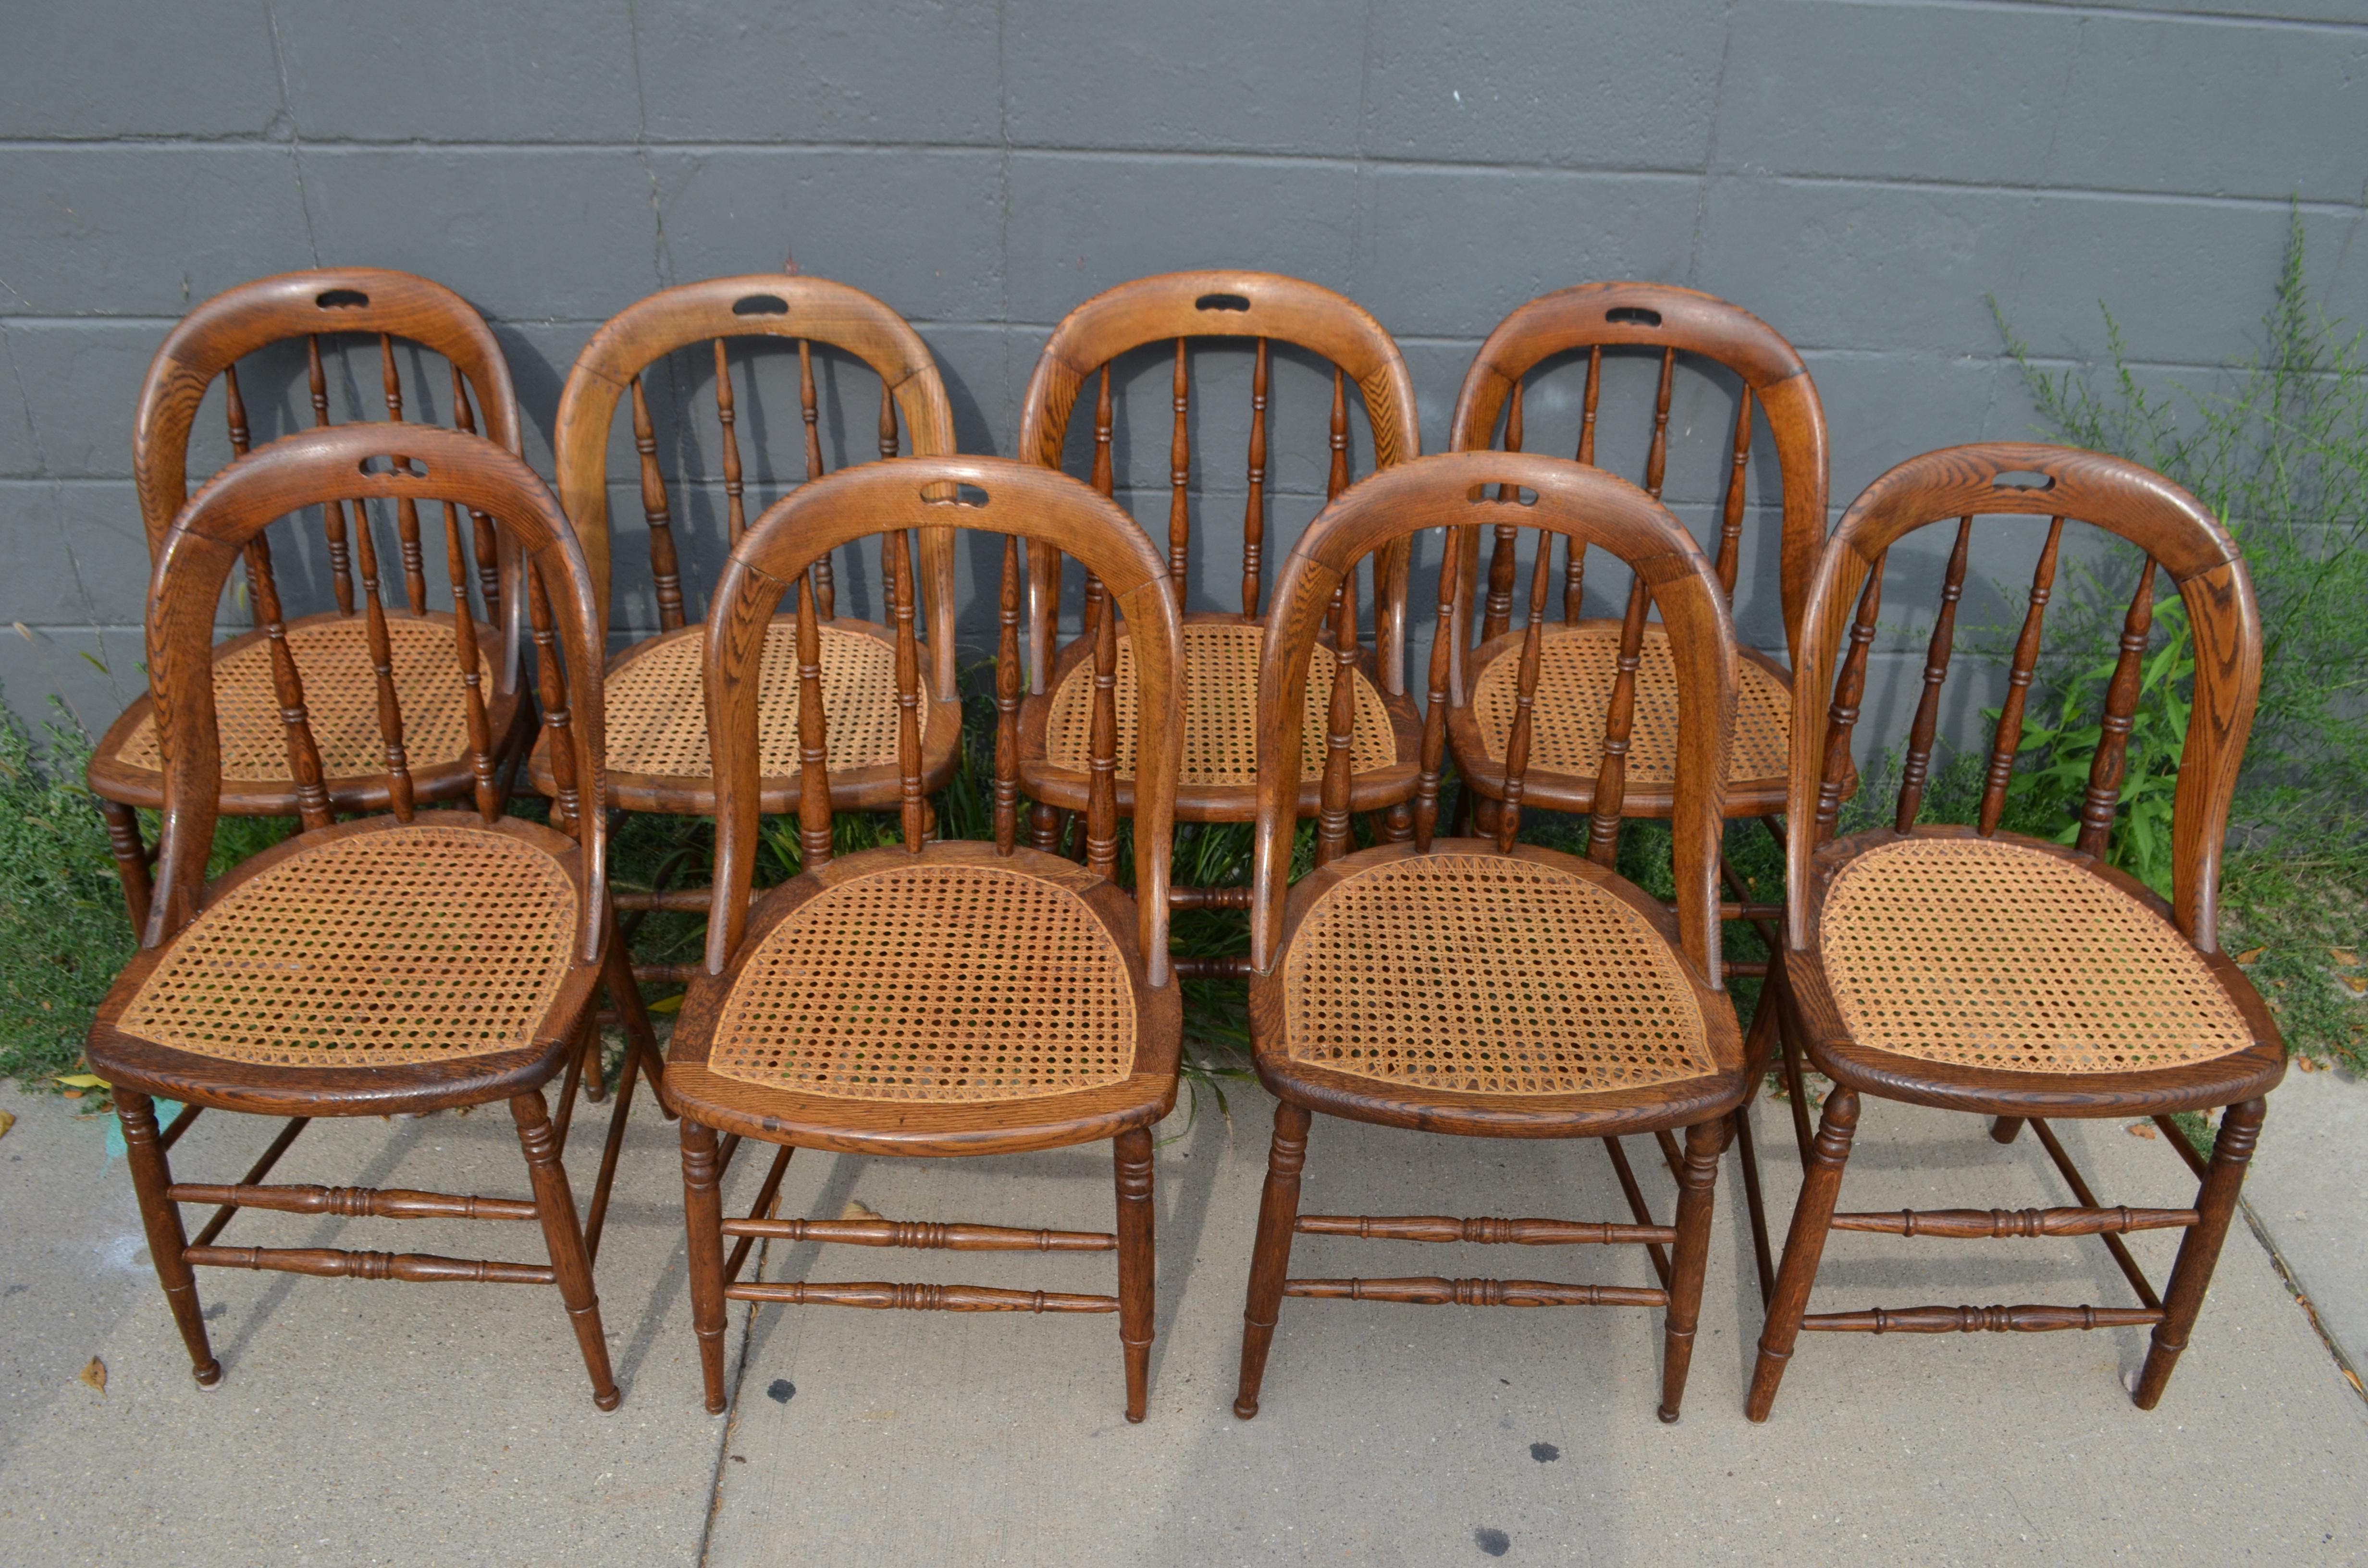 19th Century Dining Room Chairs with Caned Seats, Victorian Windsor Bow Back Style, Set of 8